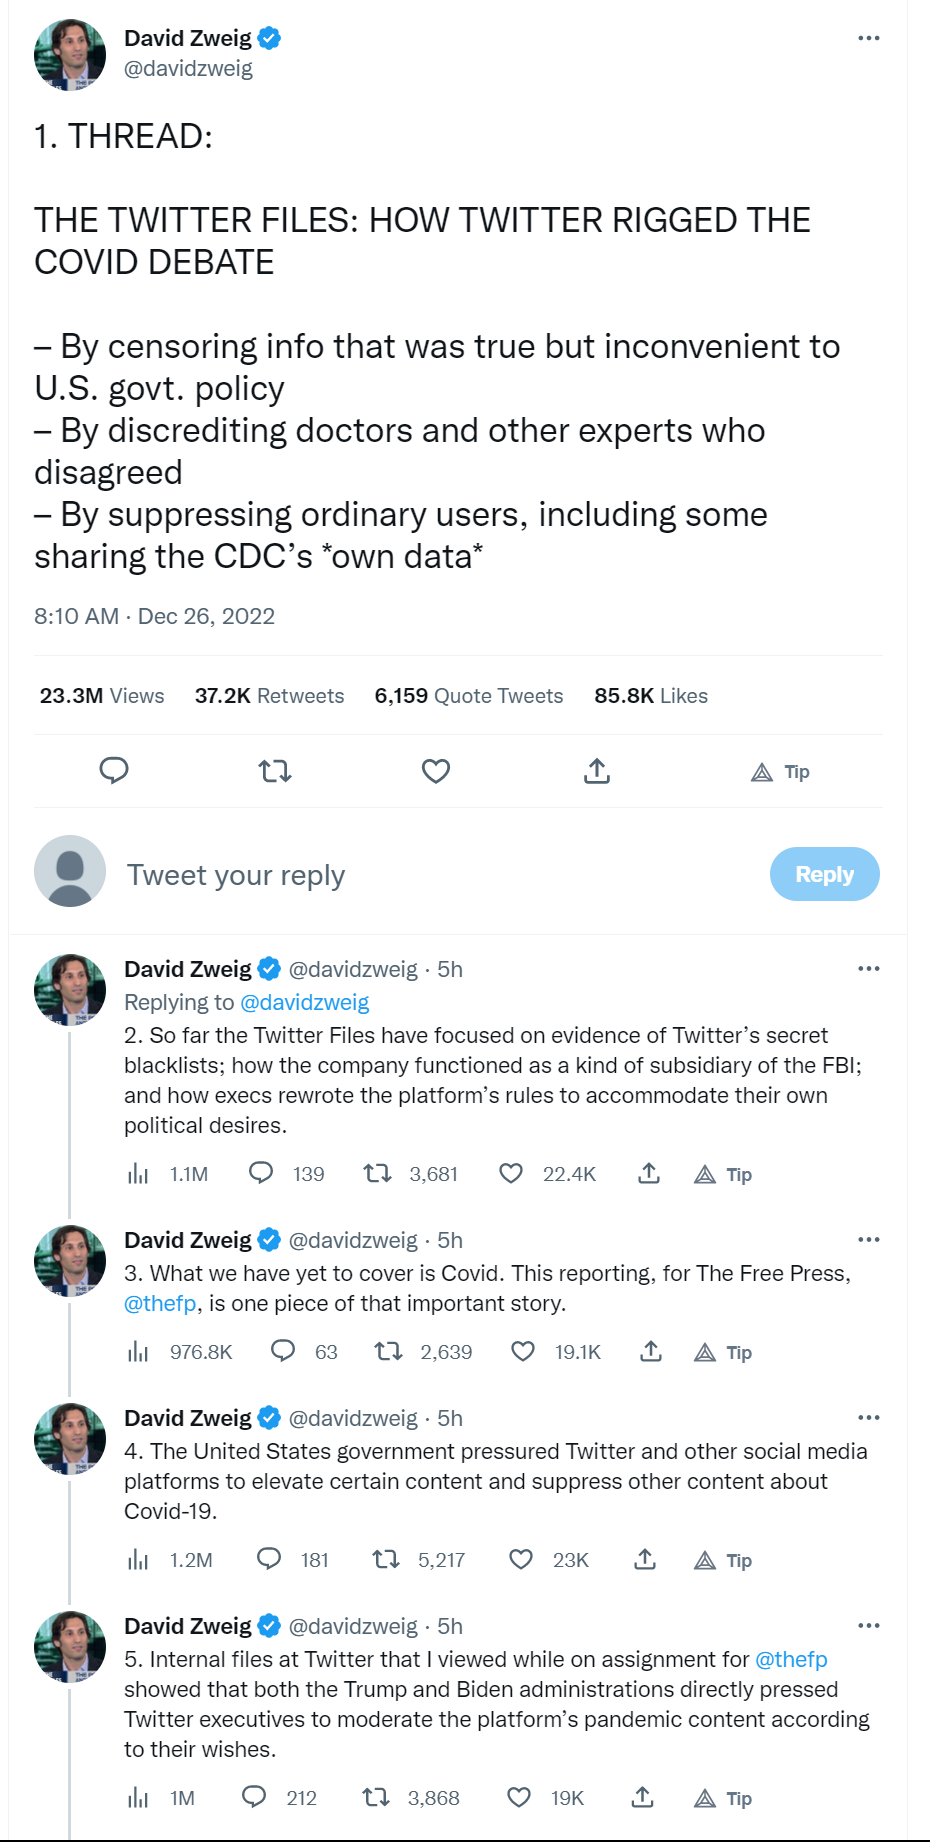 TWITTER FILES Pt. 10 - HOW TWITTER RIGGED THE COVID DEBATE